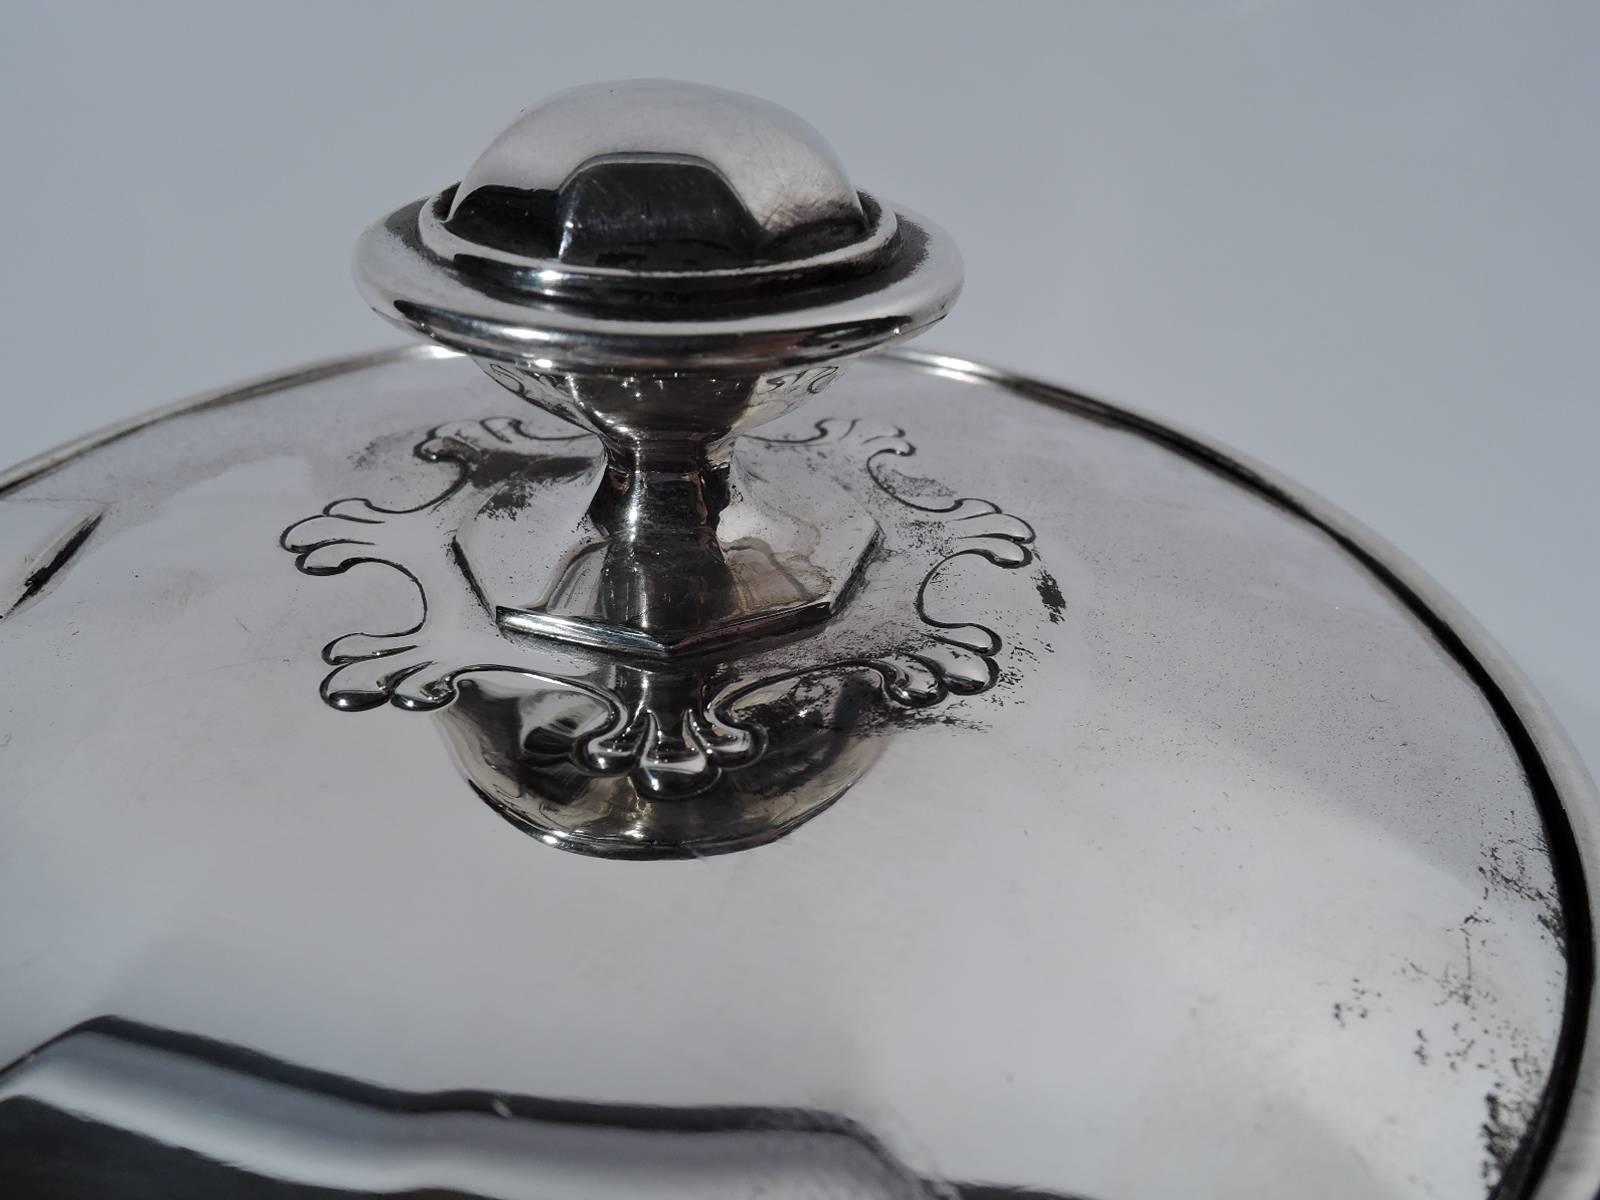 Sterling silver coffeepot in St Dunstan pattern. Made by Tiffany & Co. in New York, circa 1903. Curved and faceted body and s-scroll spout, scroll bracket handle, and raised foot. Cover flat, hinged, and faceted. Fleur de lys (trefoil) ornament. A